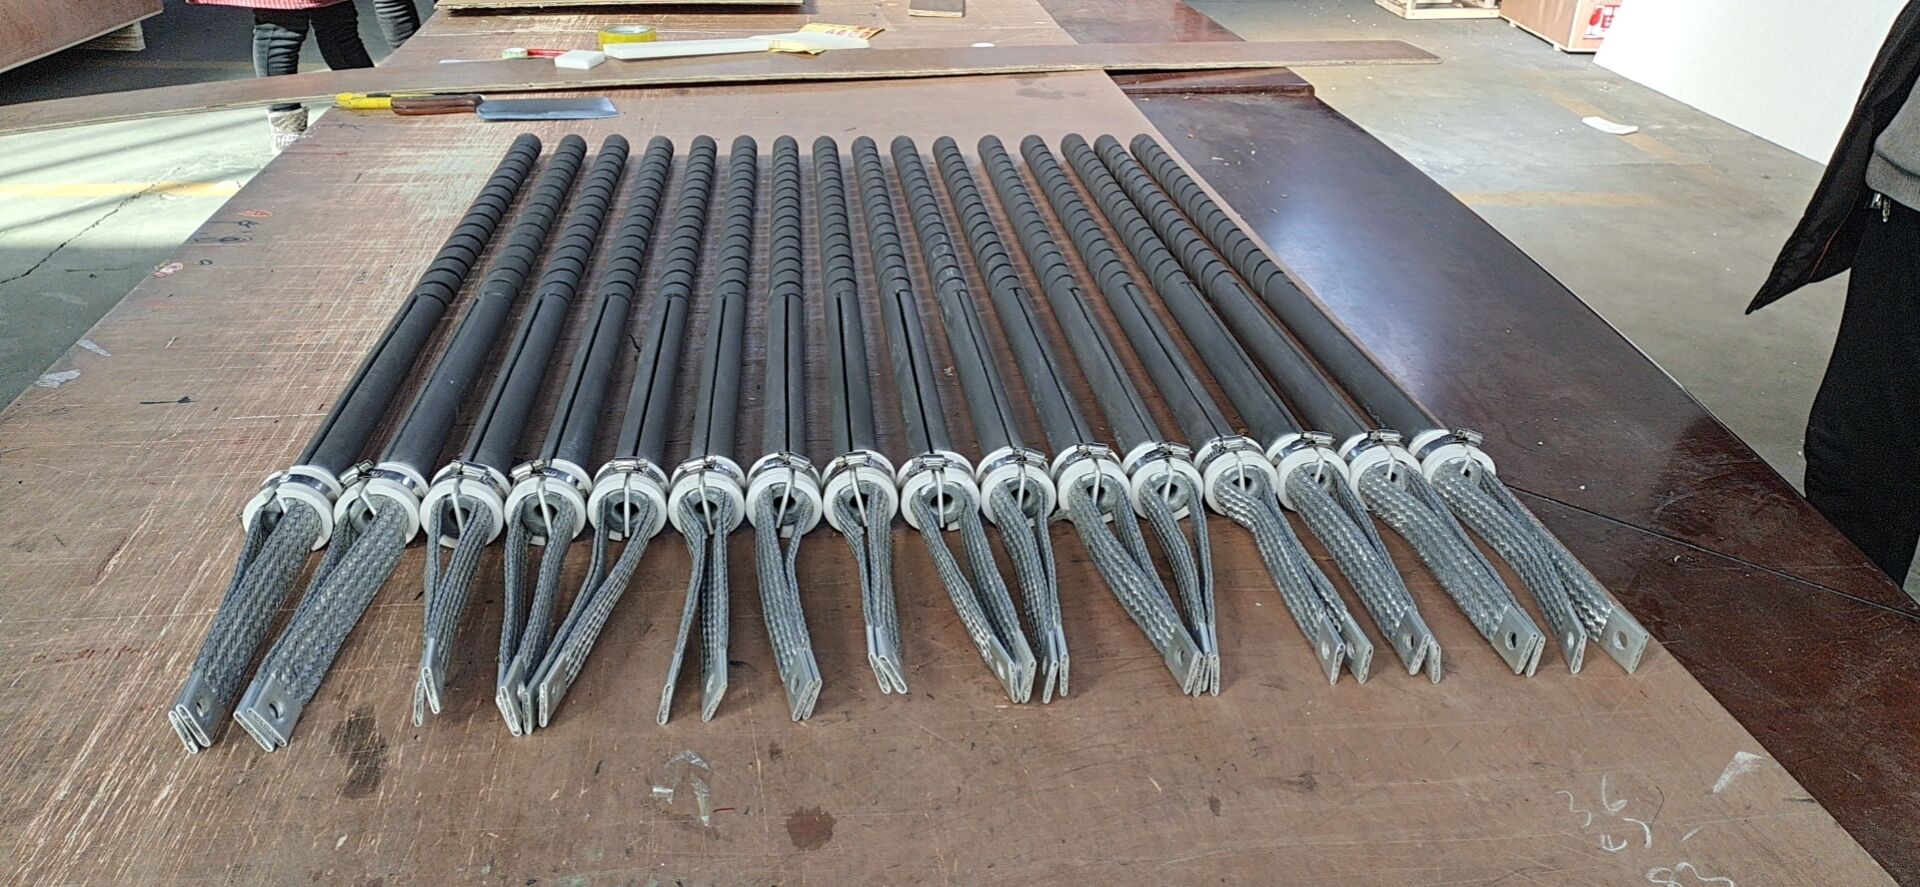 Double Spiral SiC Heating Elements